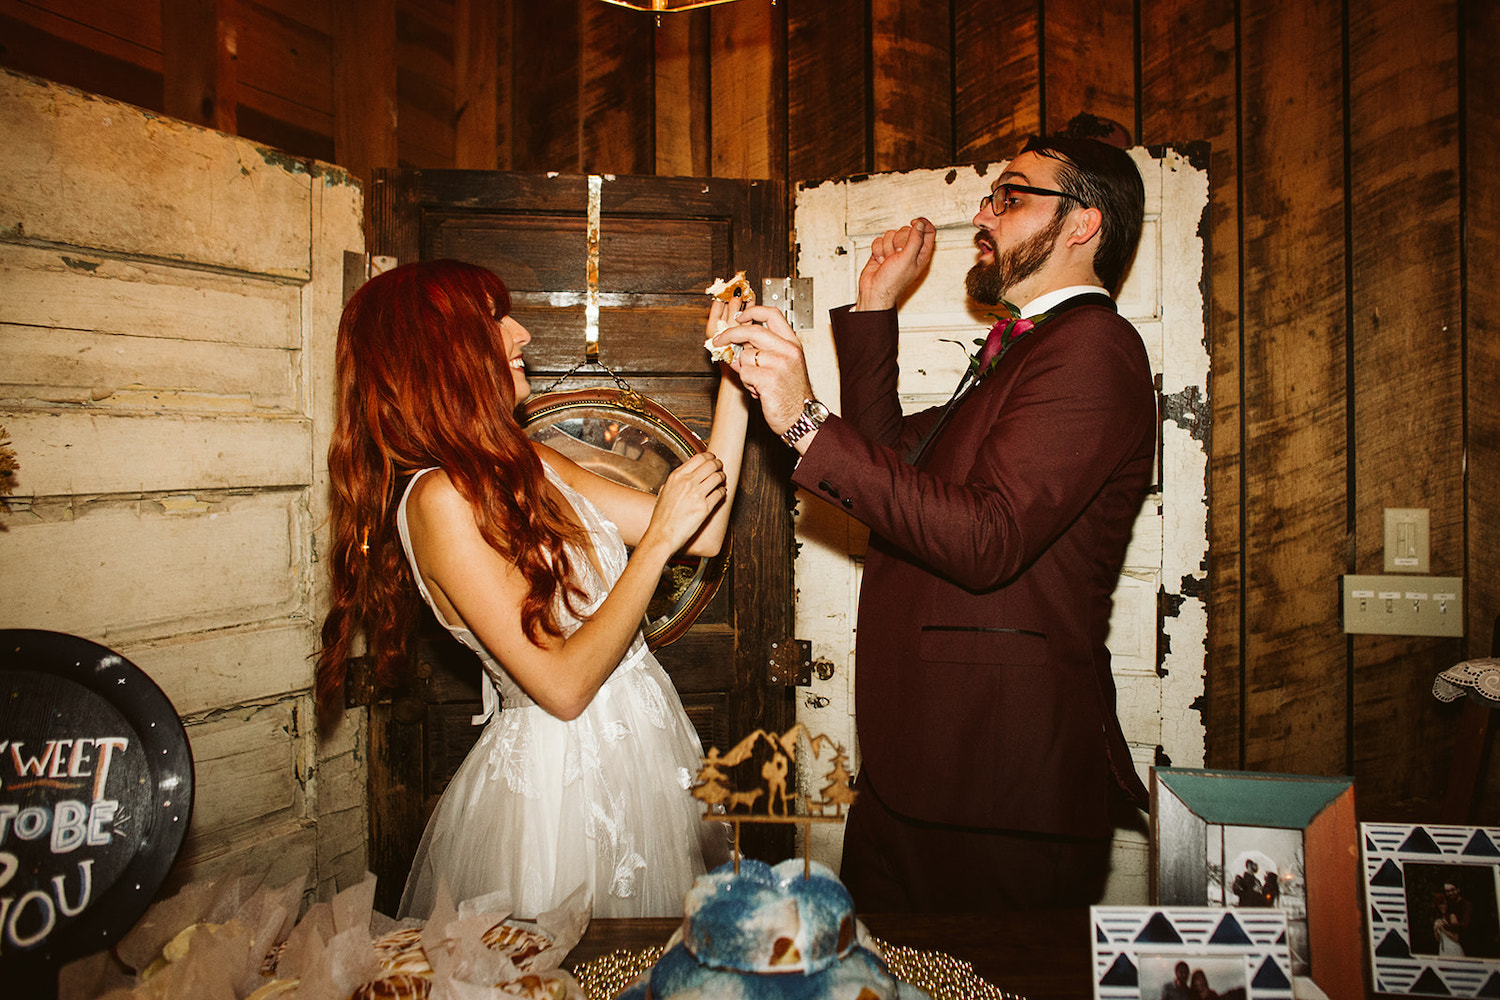 bride and groom feed each other wedding cake at their reception